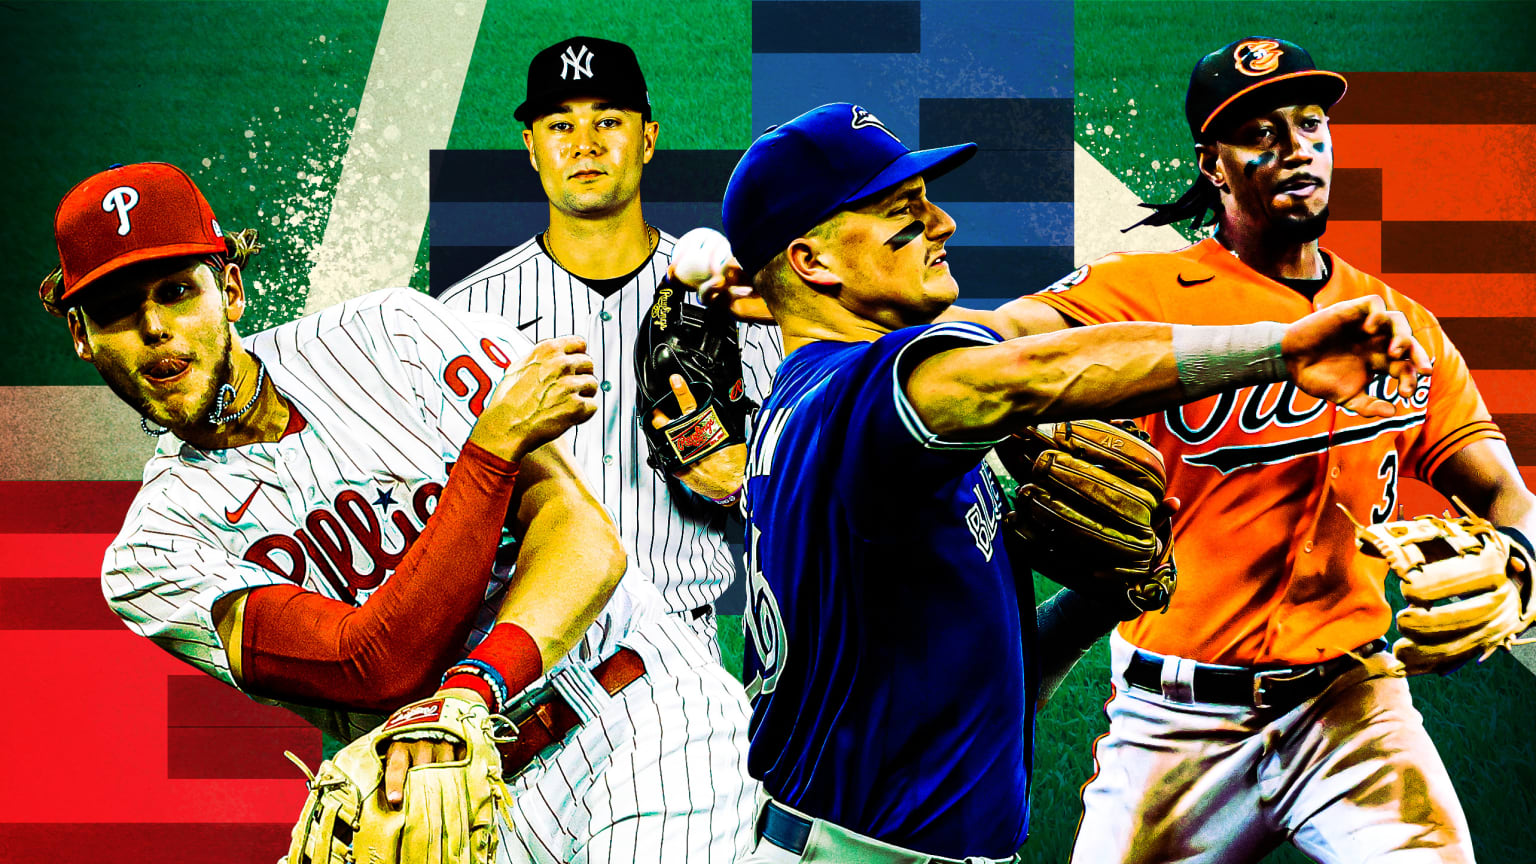 Players for the Phillies, Yankees, Blue Jays and Orioles against a multicolored background that matches their teams' primary colors: Red, navy blue, royal blue and orange, plus some green